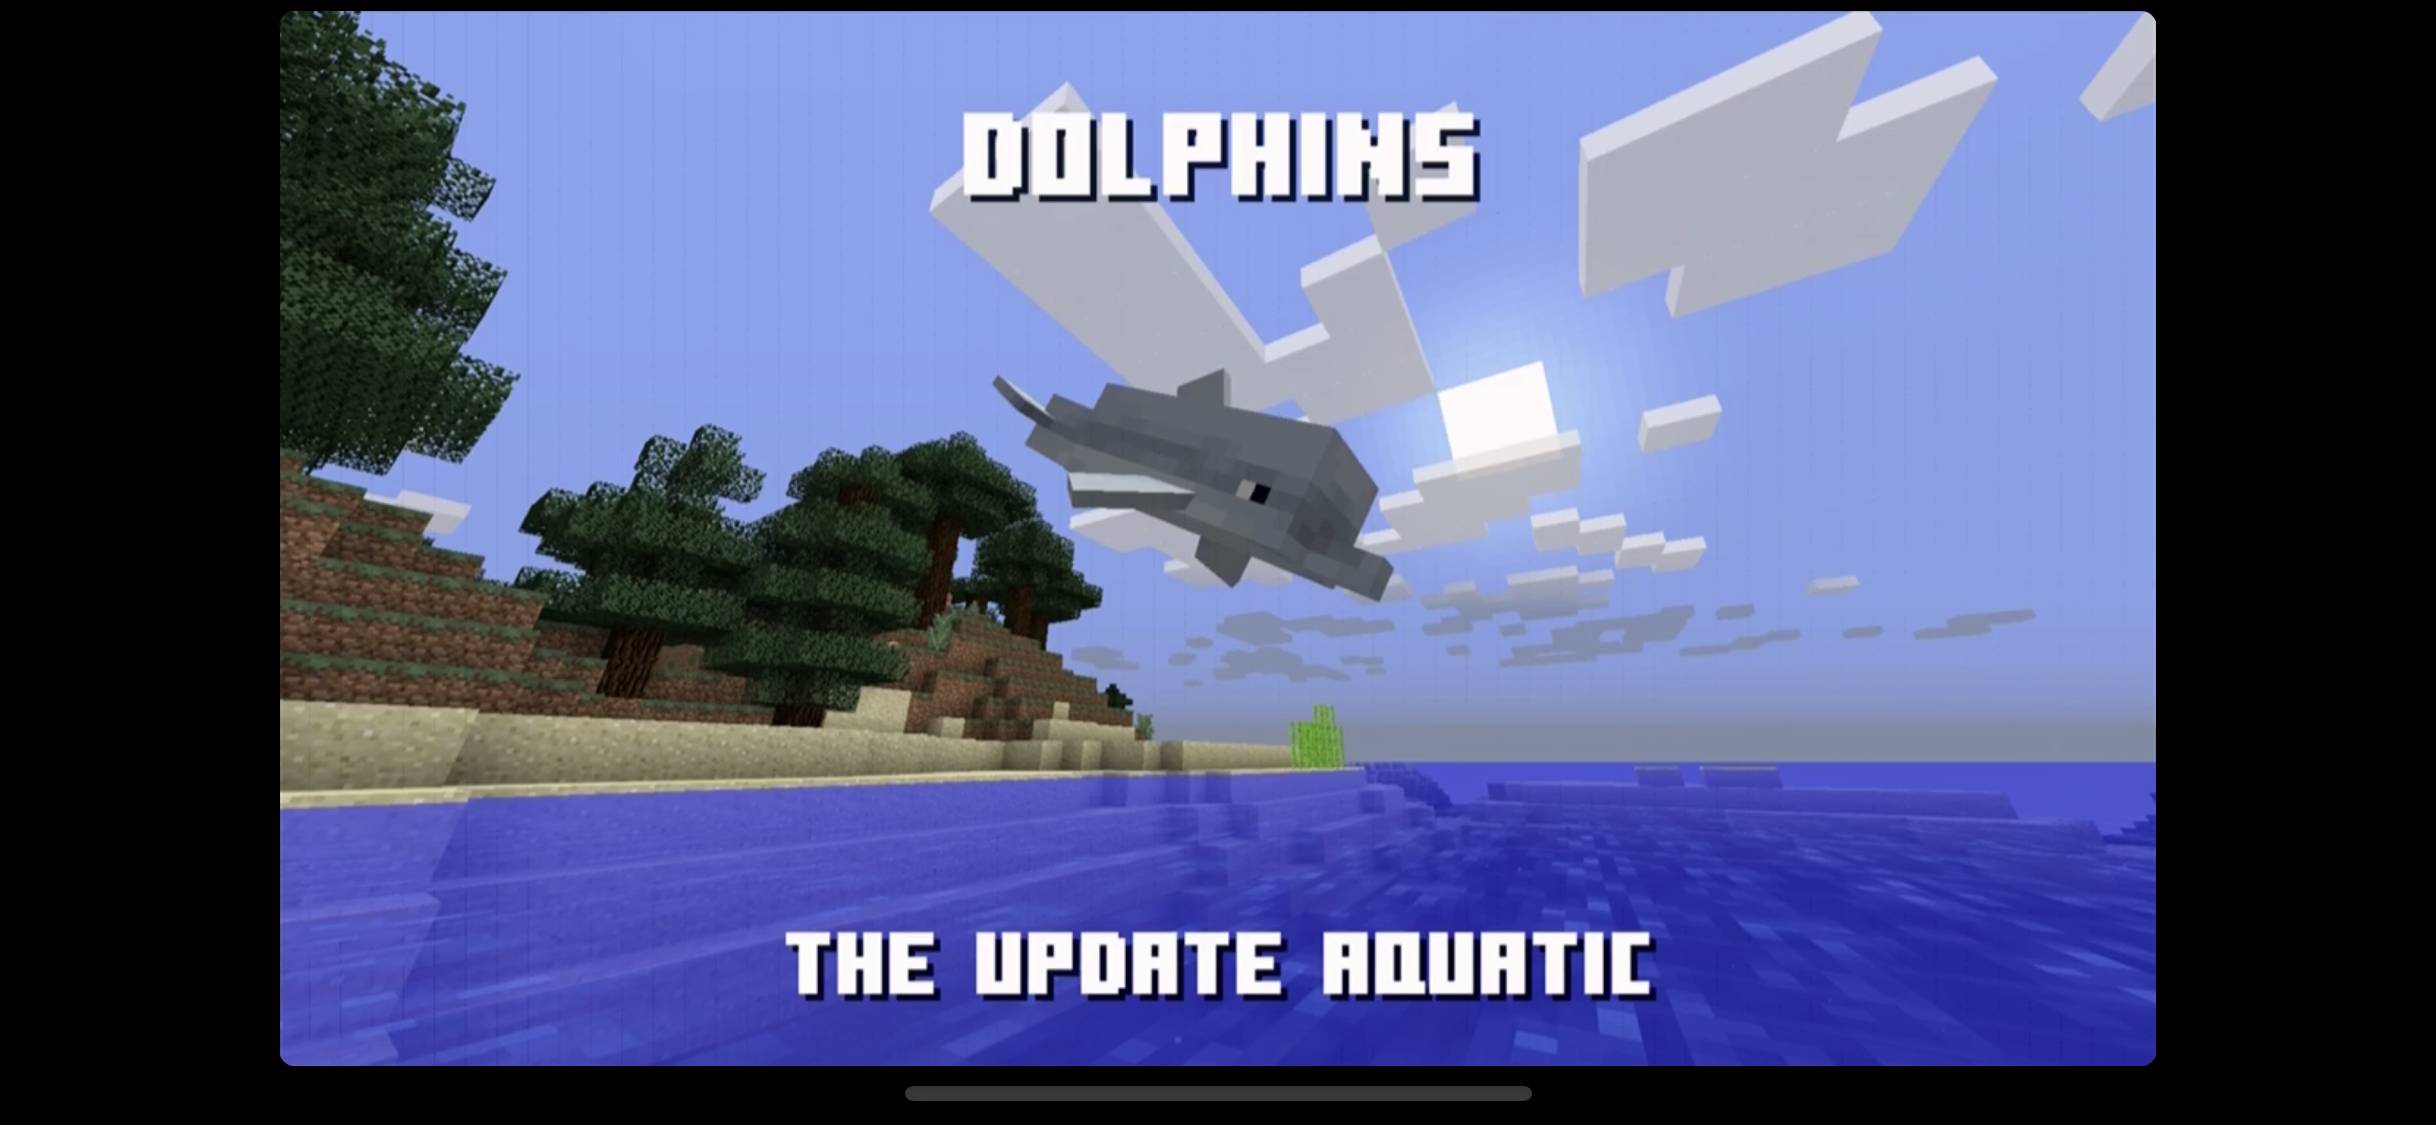 'Minecraft' Aquatic Update Announced at MineCon Earth - Will Add Dolphins, Fish, Coral, Tridents, and Much, Much More